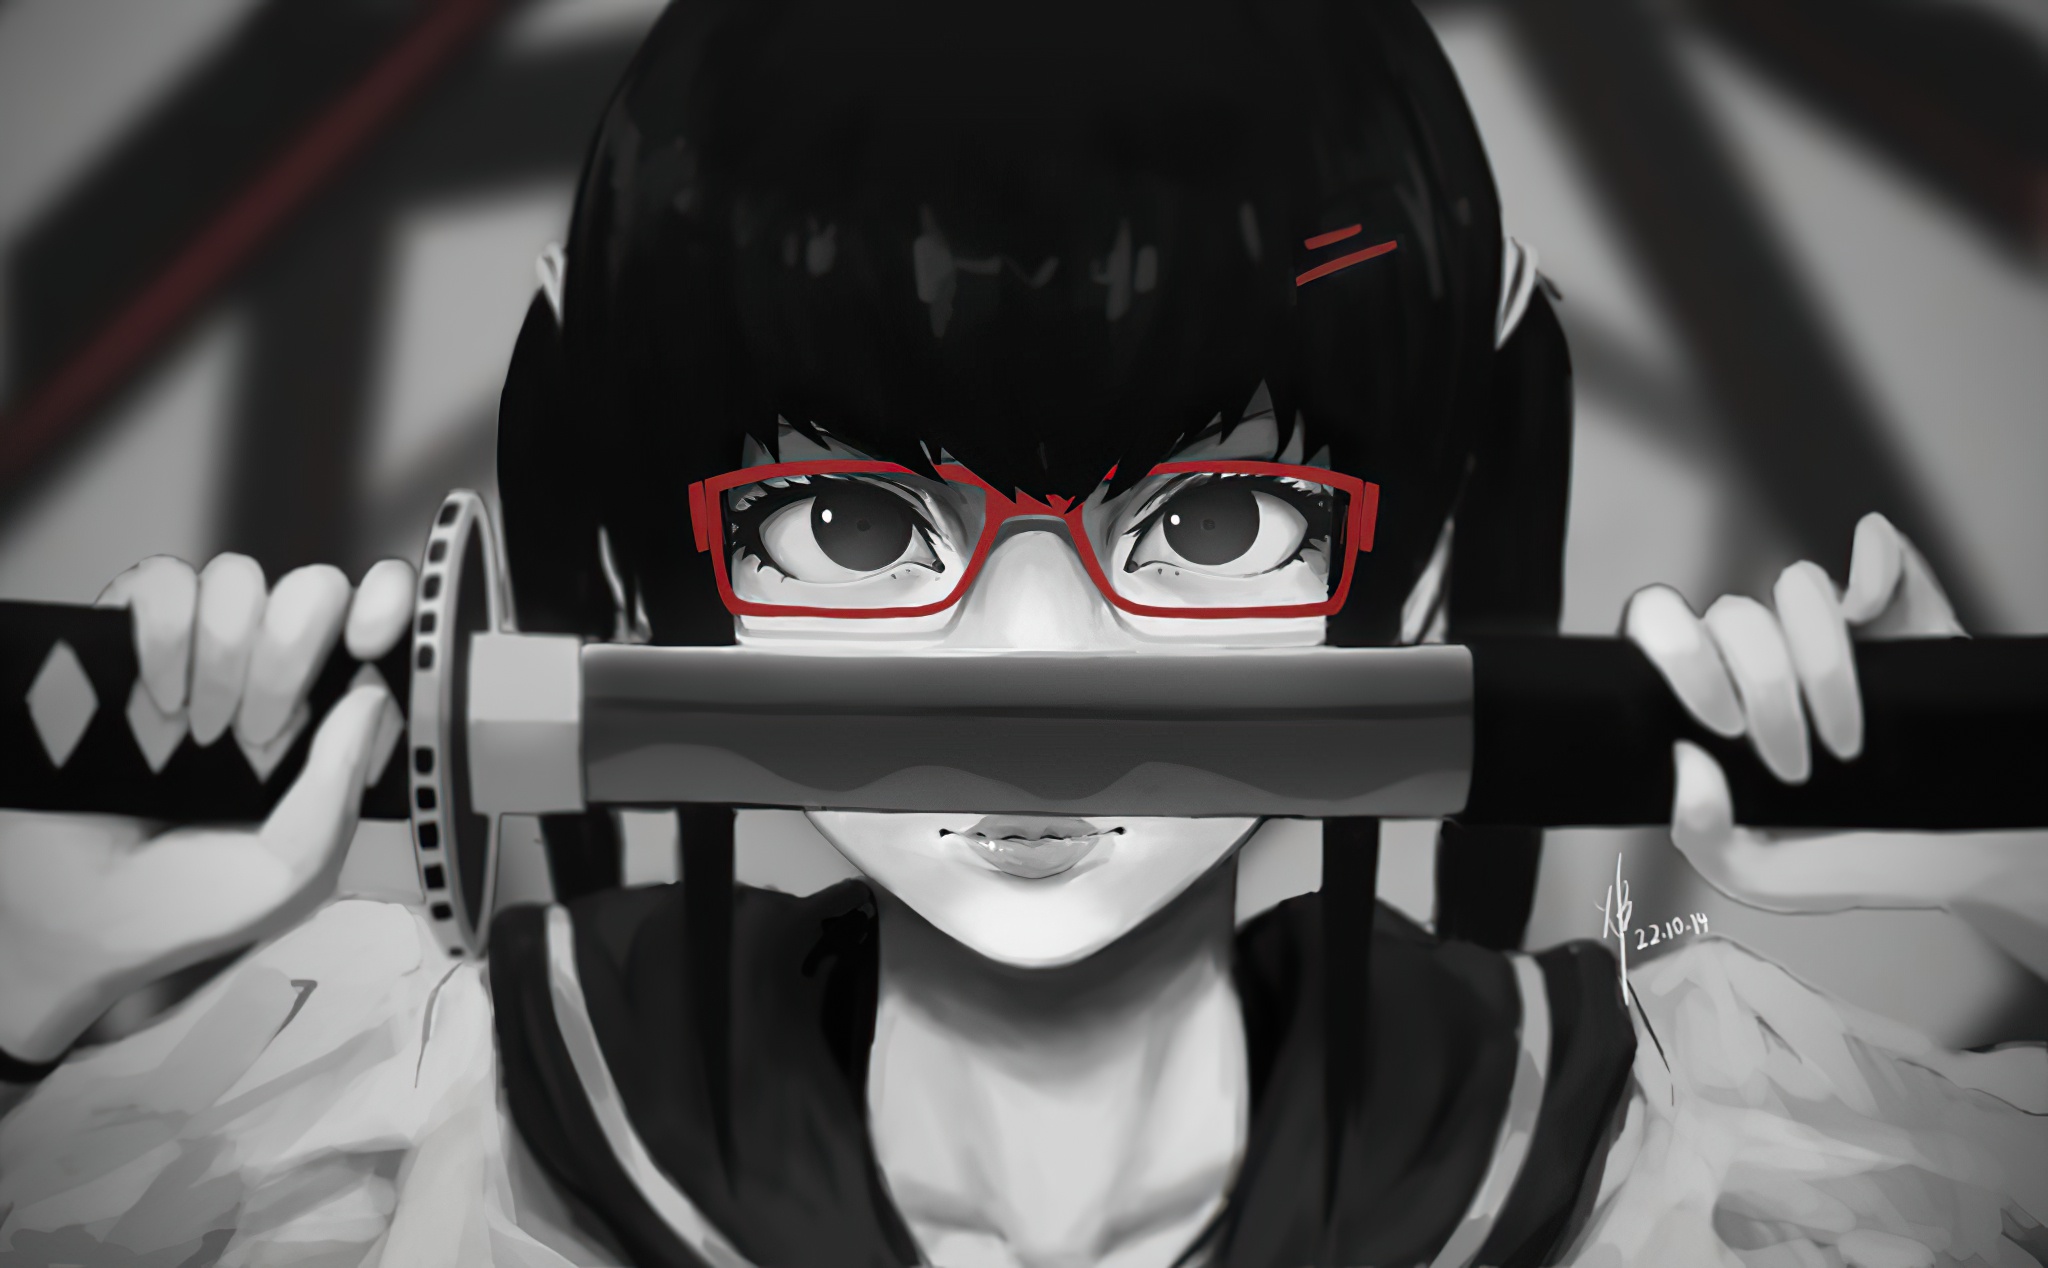 Anime Anime Girls Selective Coloring Katana Girls With Swords 2D Original Characters Women With Glas 2048x1268